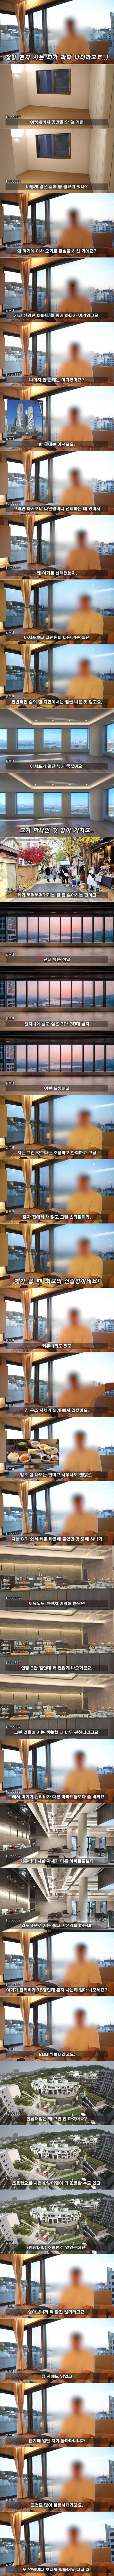 A man living alone in Hannam 75 pyeong, looking around the house.jpg